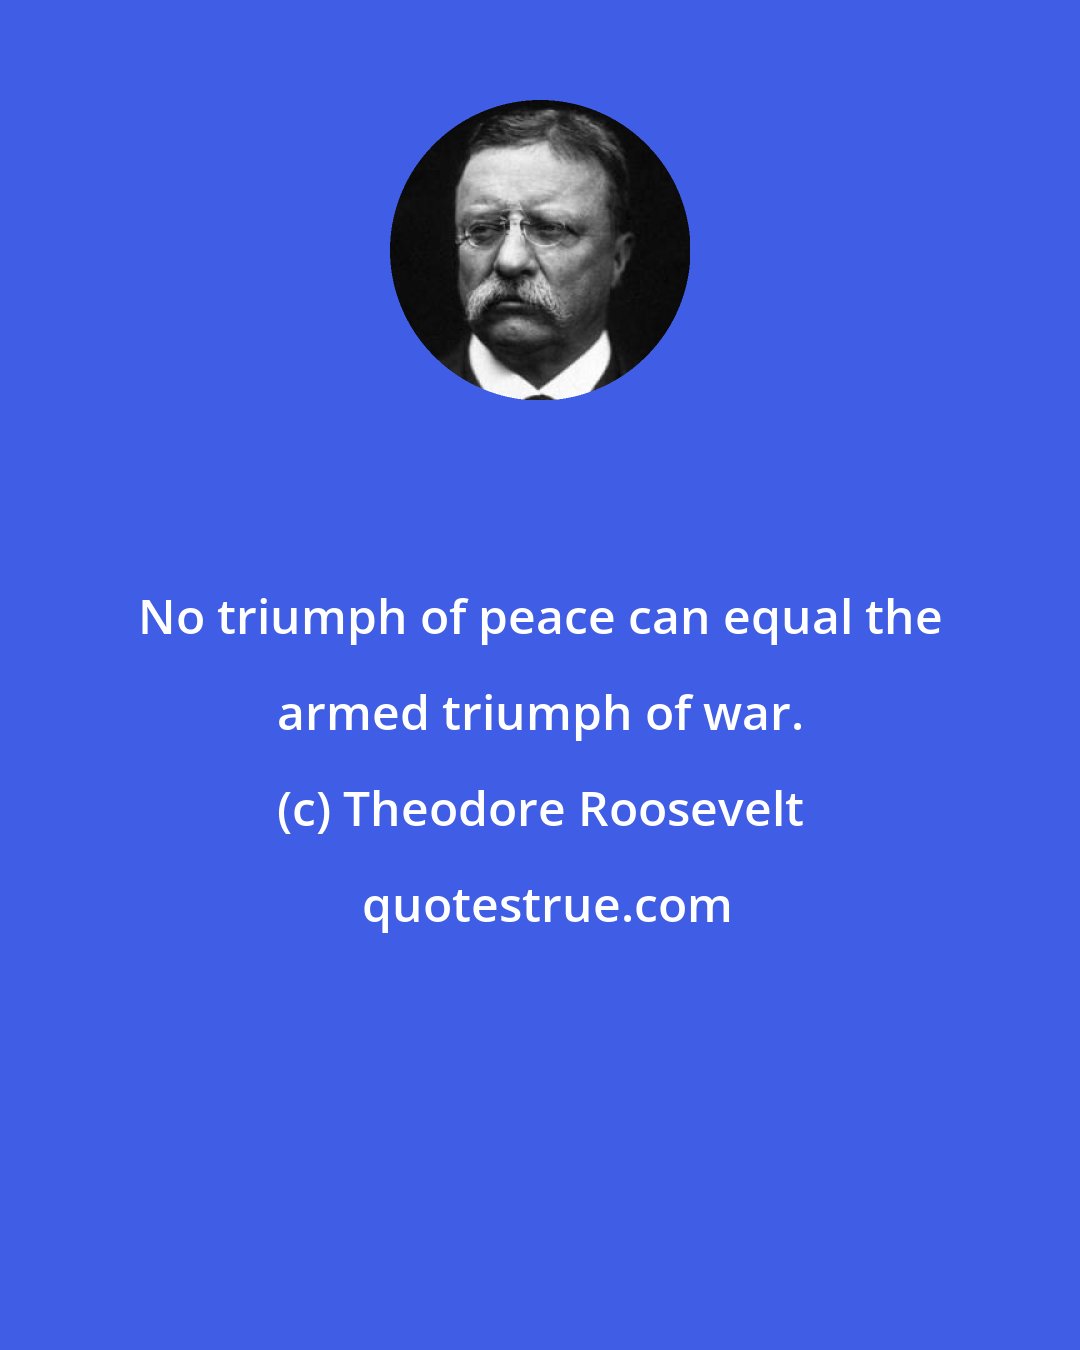 Theodore Roosevelt: No triumph of peace can equal the armed triumph of war.